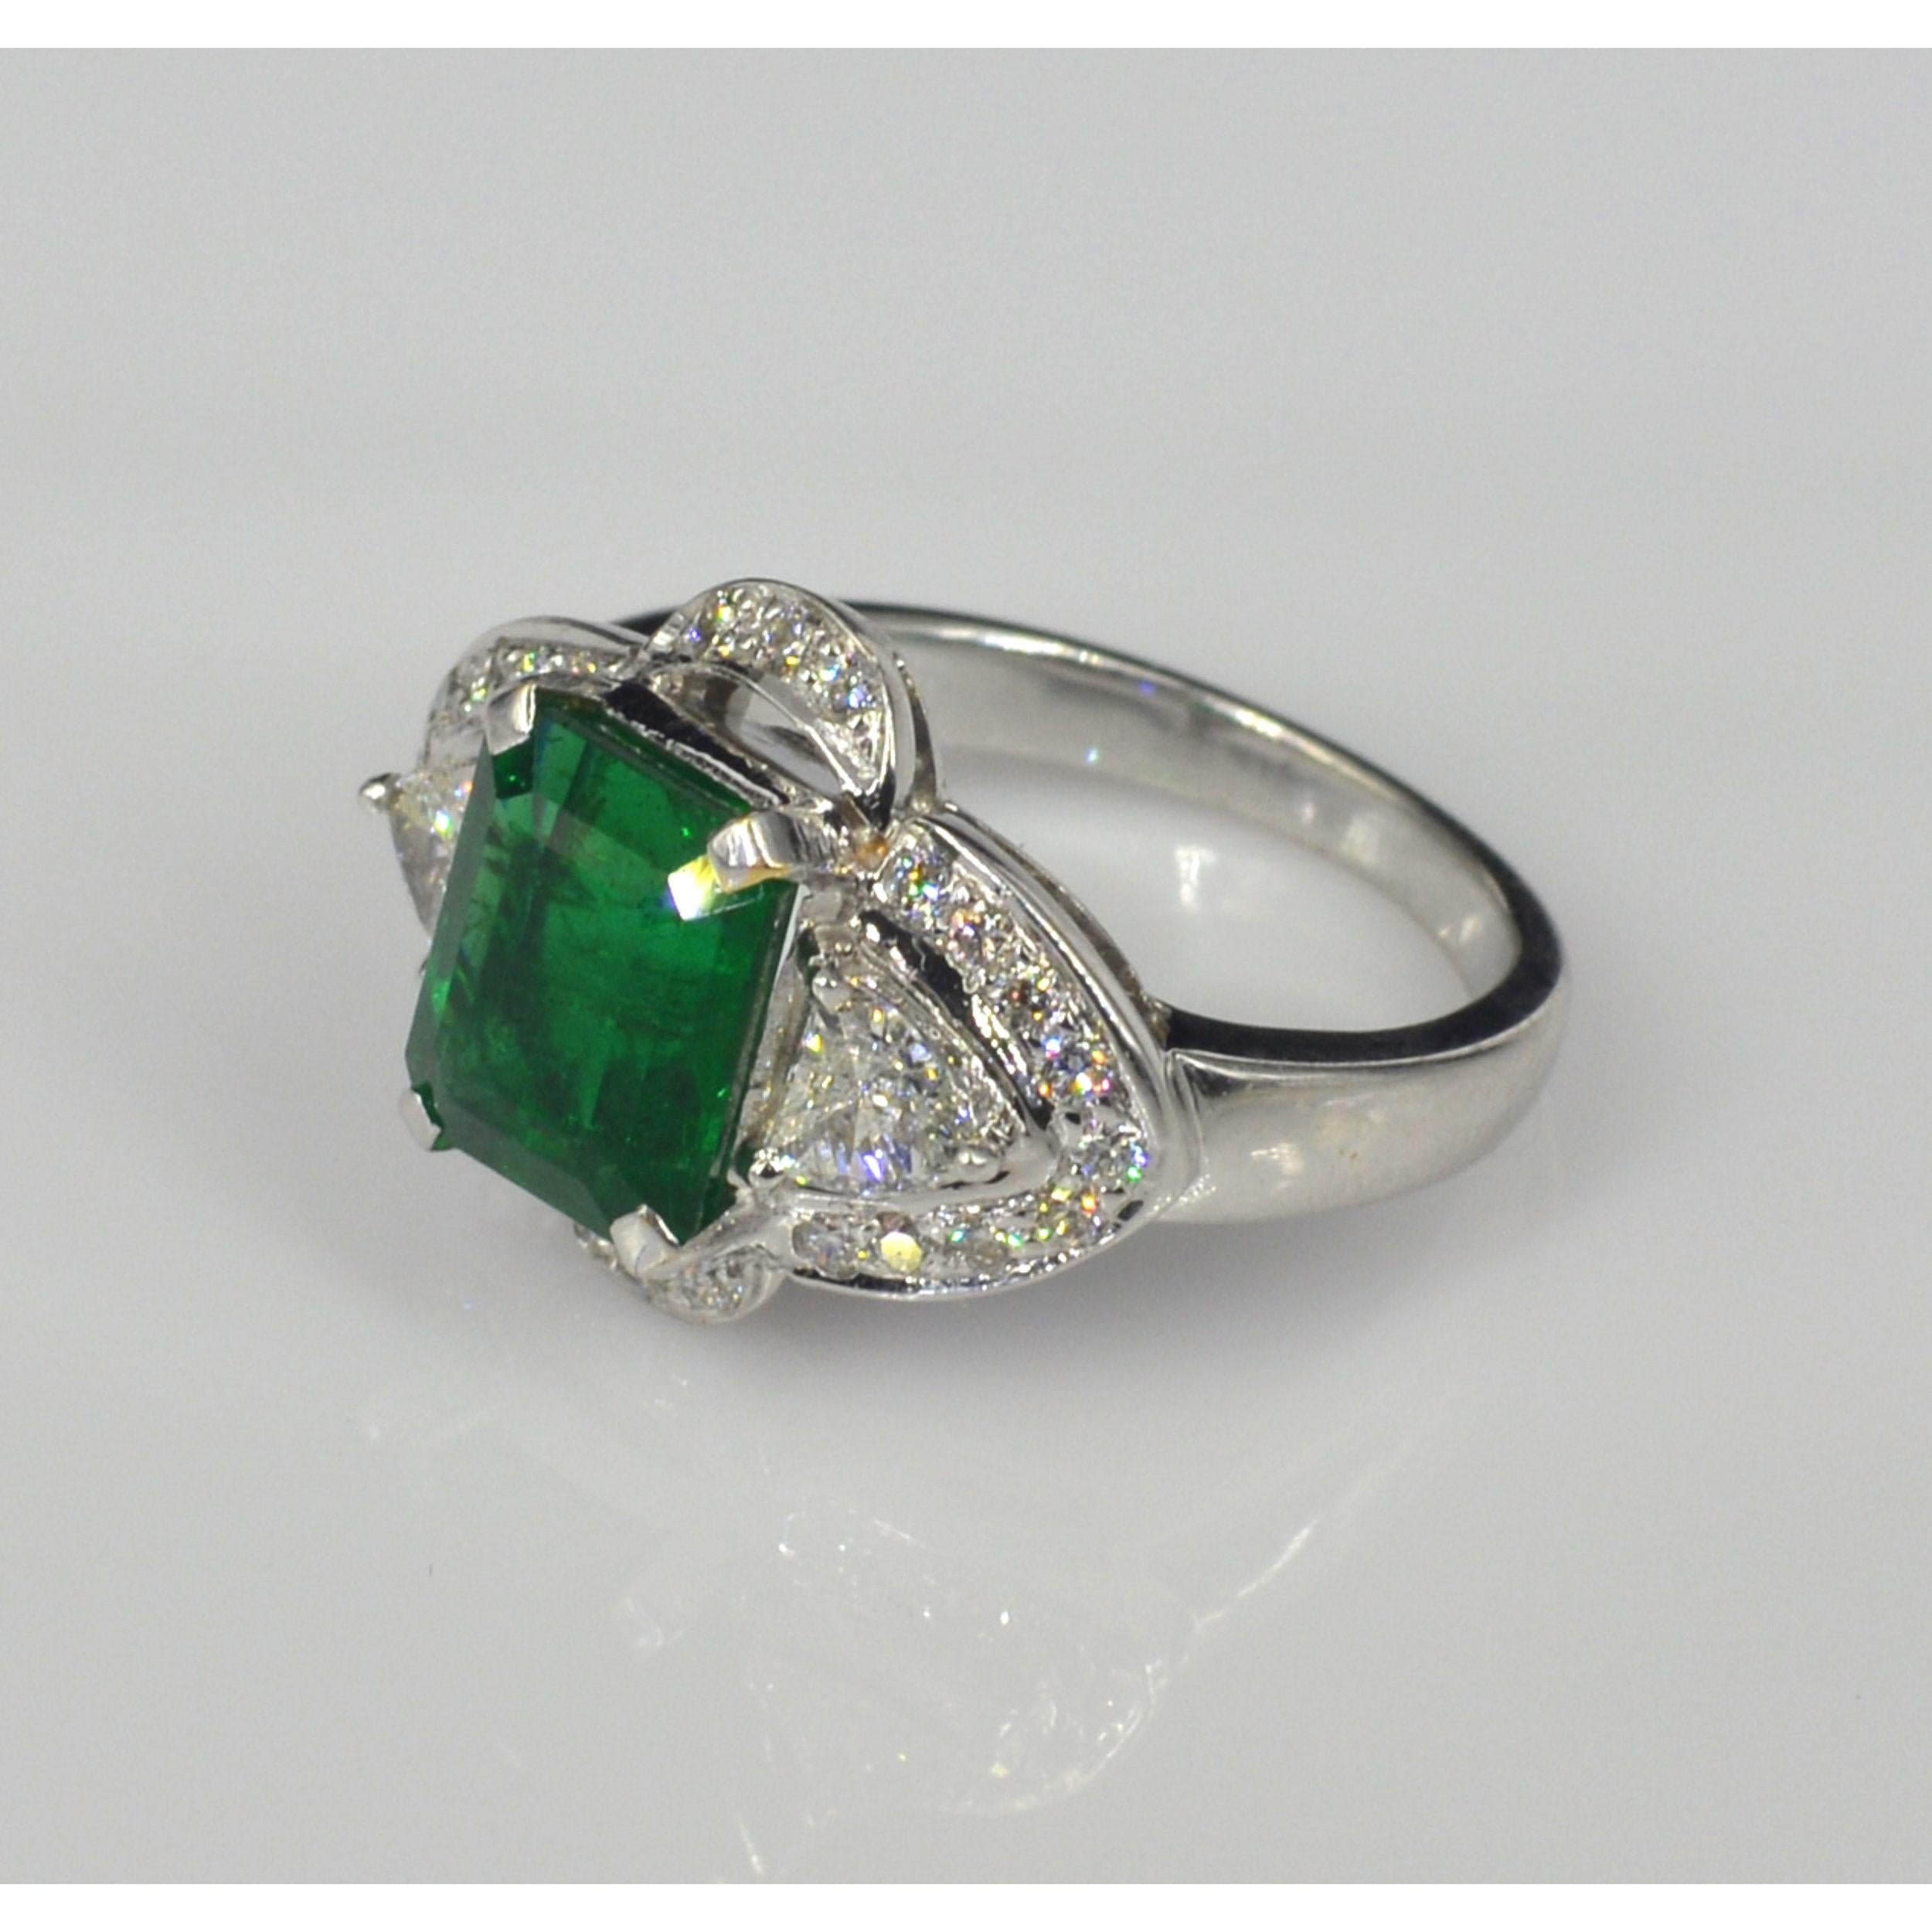 For Sale:  Antique 3 Carat Emerald Engagement Ring, Emerald Statement Ring 2